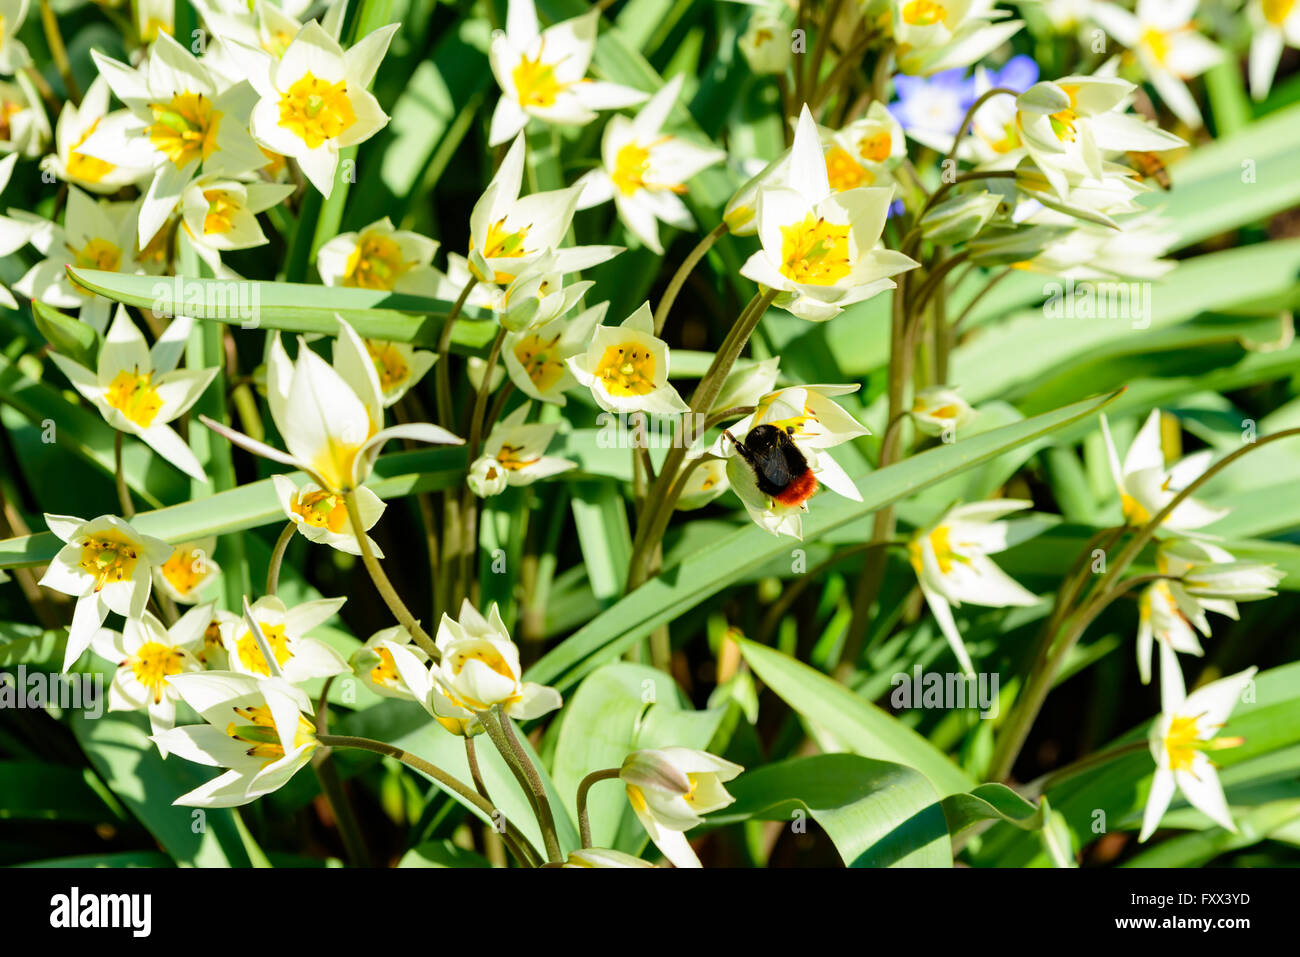 Tulipa turkestanica, the Turkestan tulip, here seen together with a Bombus lapidaries, the red-tailed bumblebee feeding on polle Stock Photo